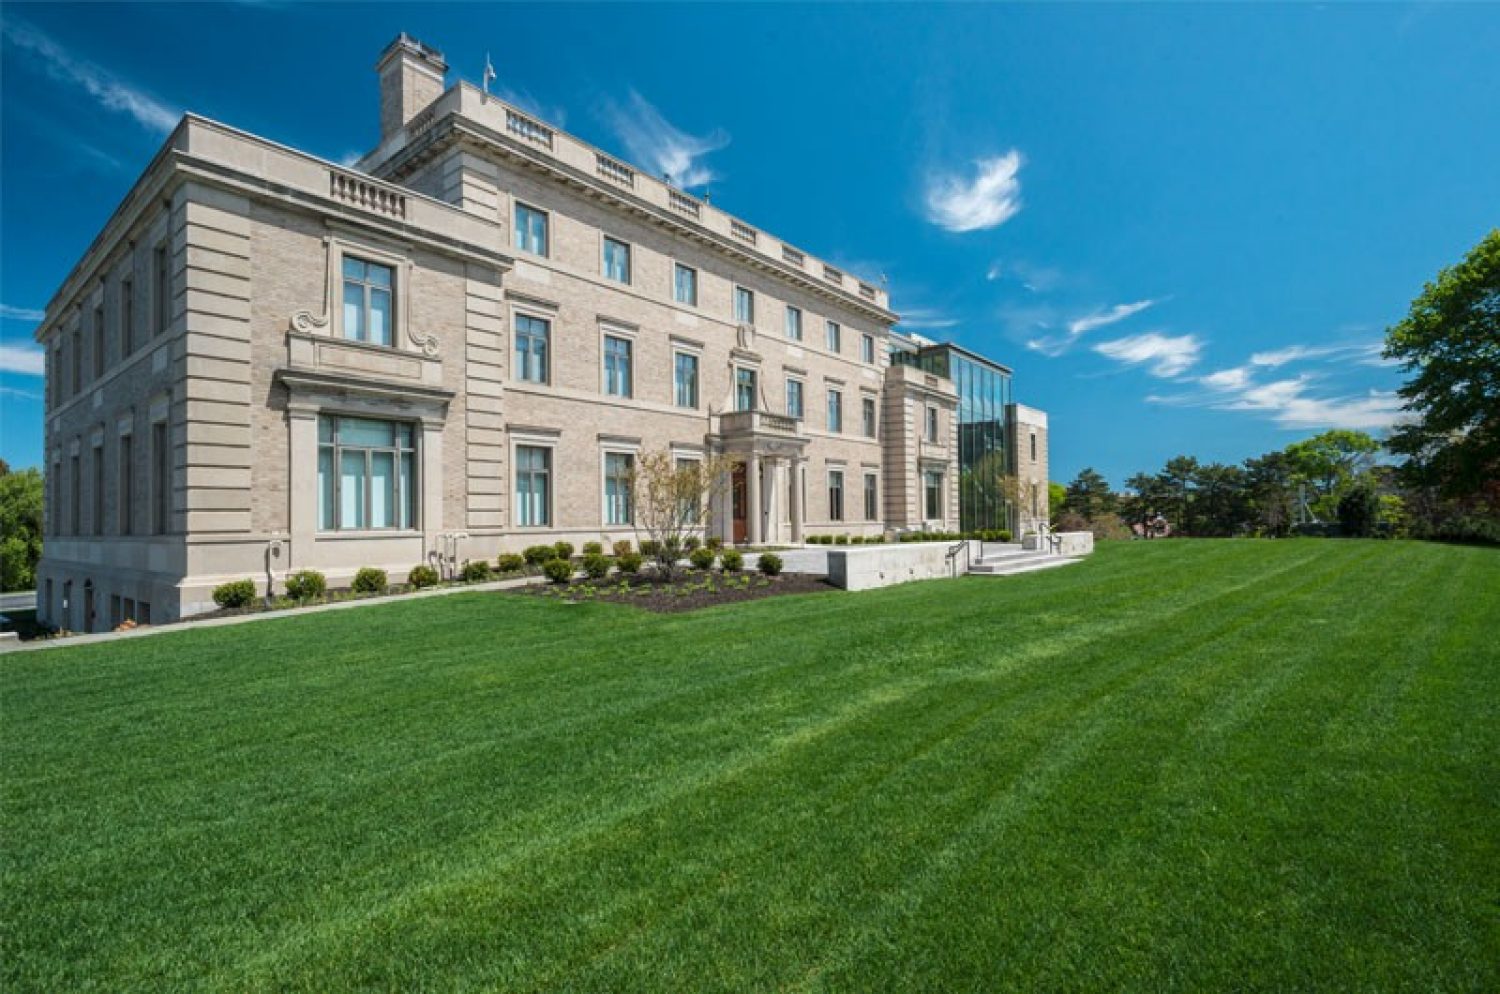 Exterior shot of 2101 with blue skies and green grass